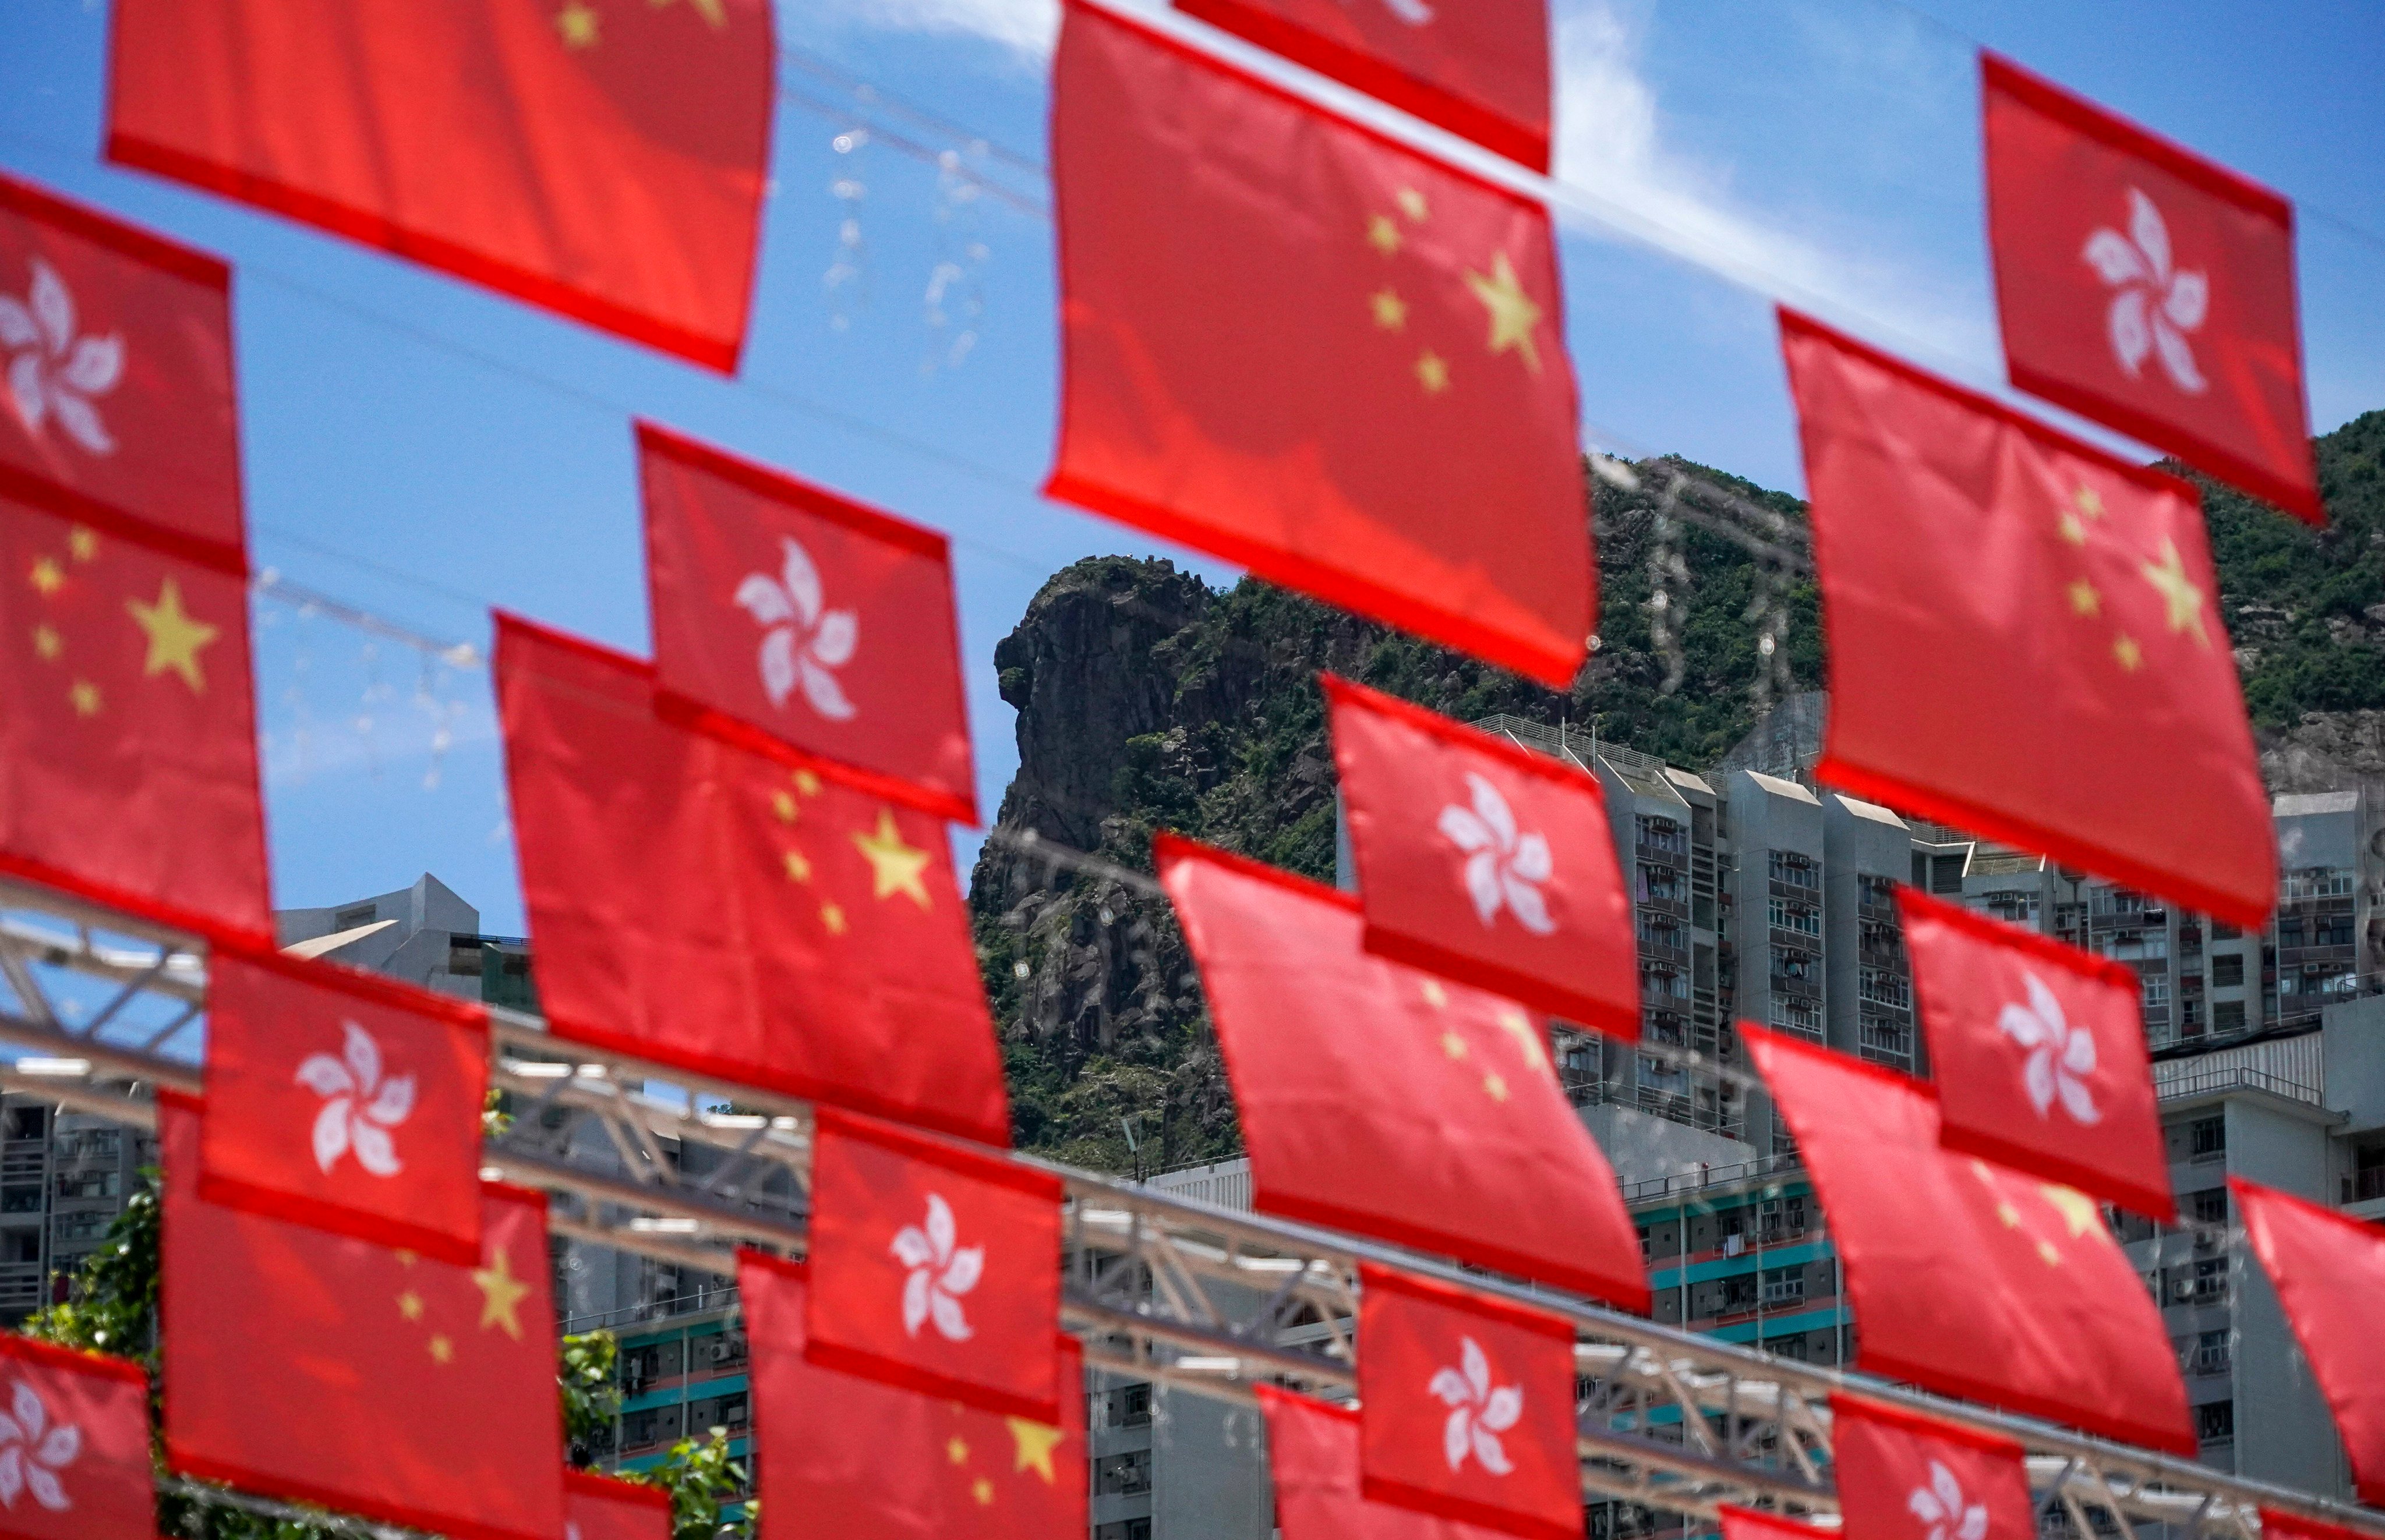 The Lion Rock is seen behind Chinese and Hong Kong flags, put up to mark the 25th anniversary of Hong Kong’s return to Chinese sovereignty, on June 26. Photo: Felix Wong